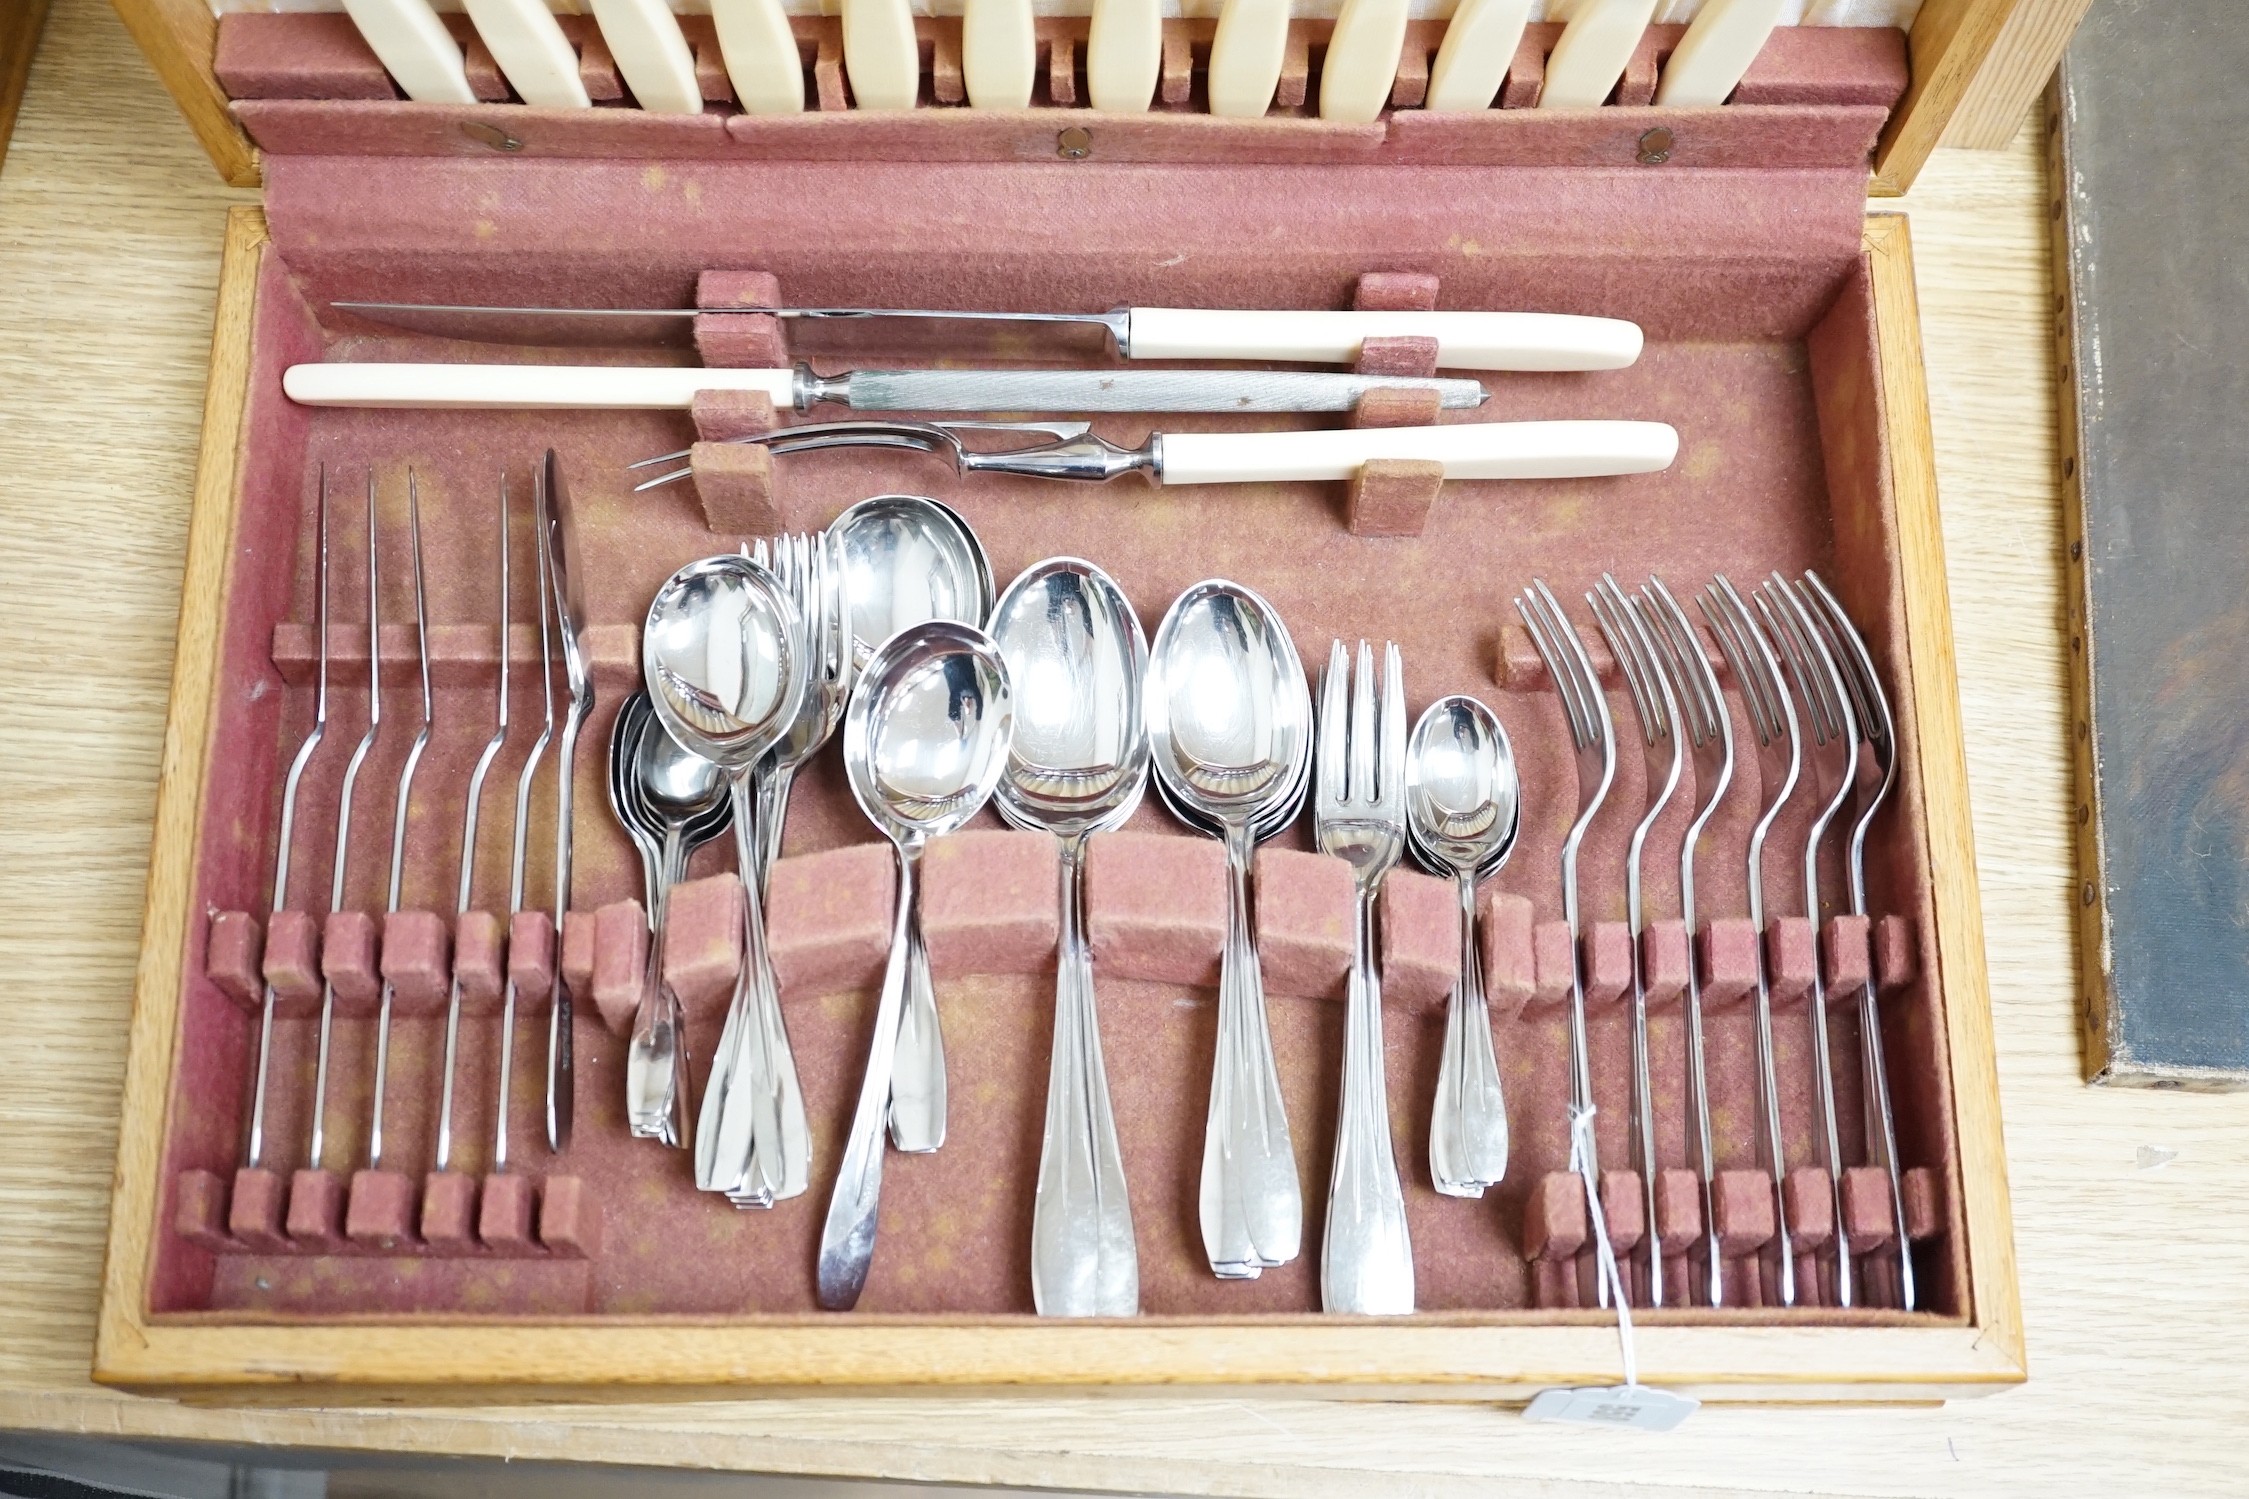 A complete stainless steel canteen set by Cooper Bros. Ltd